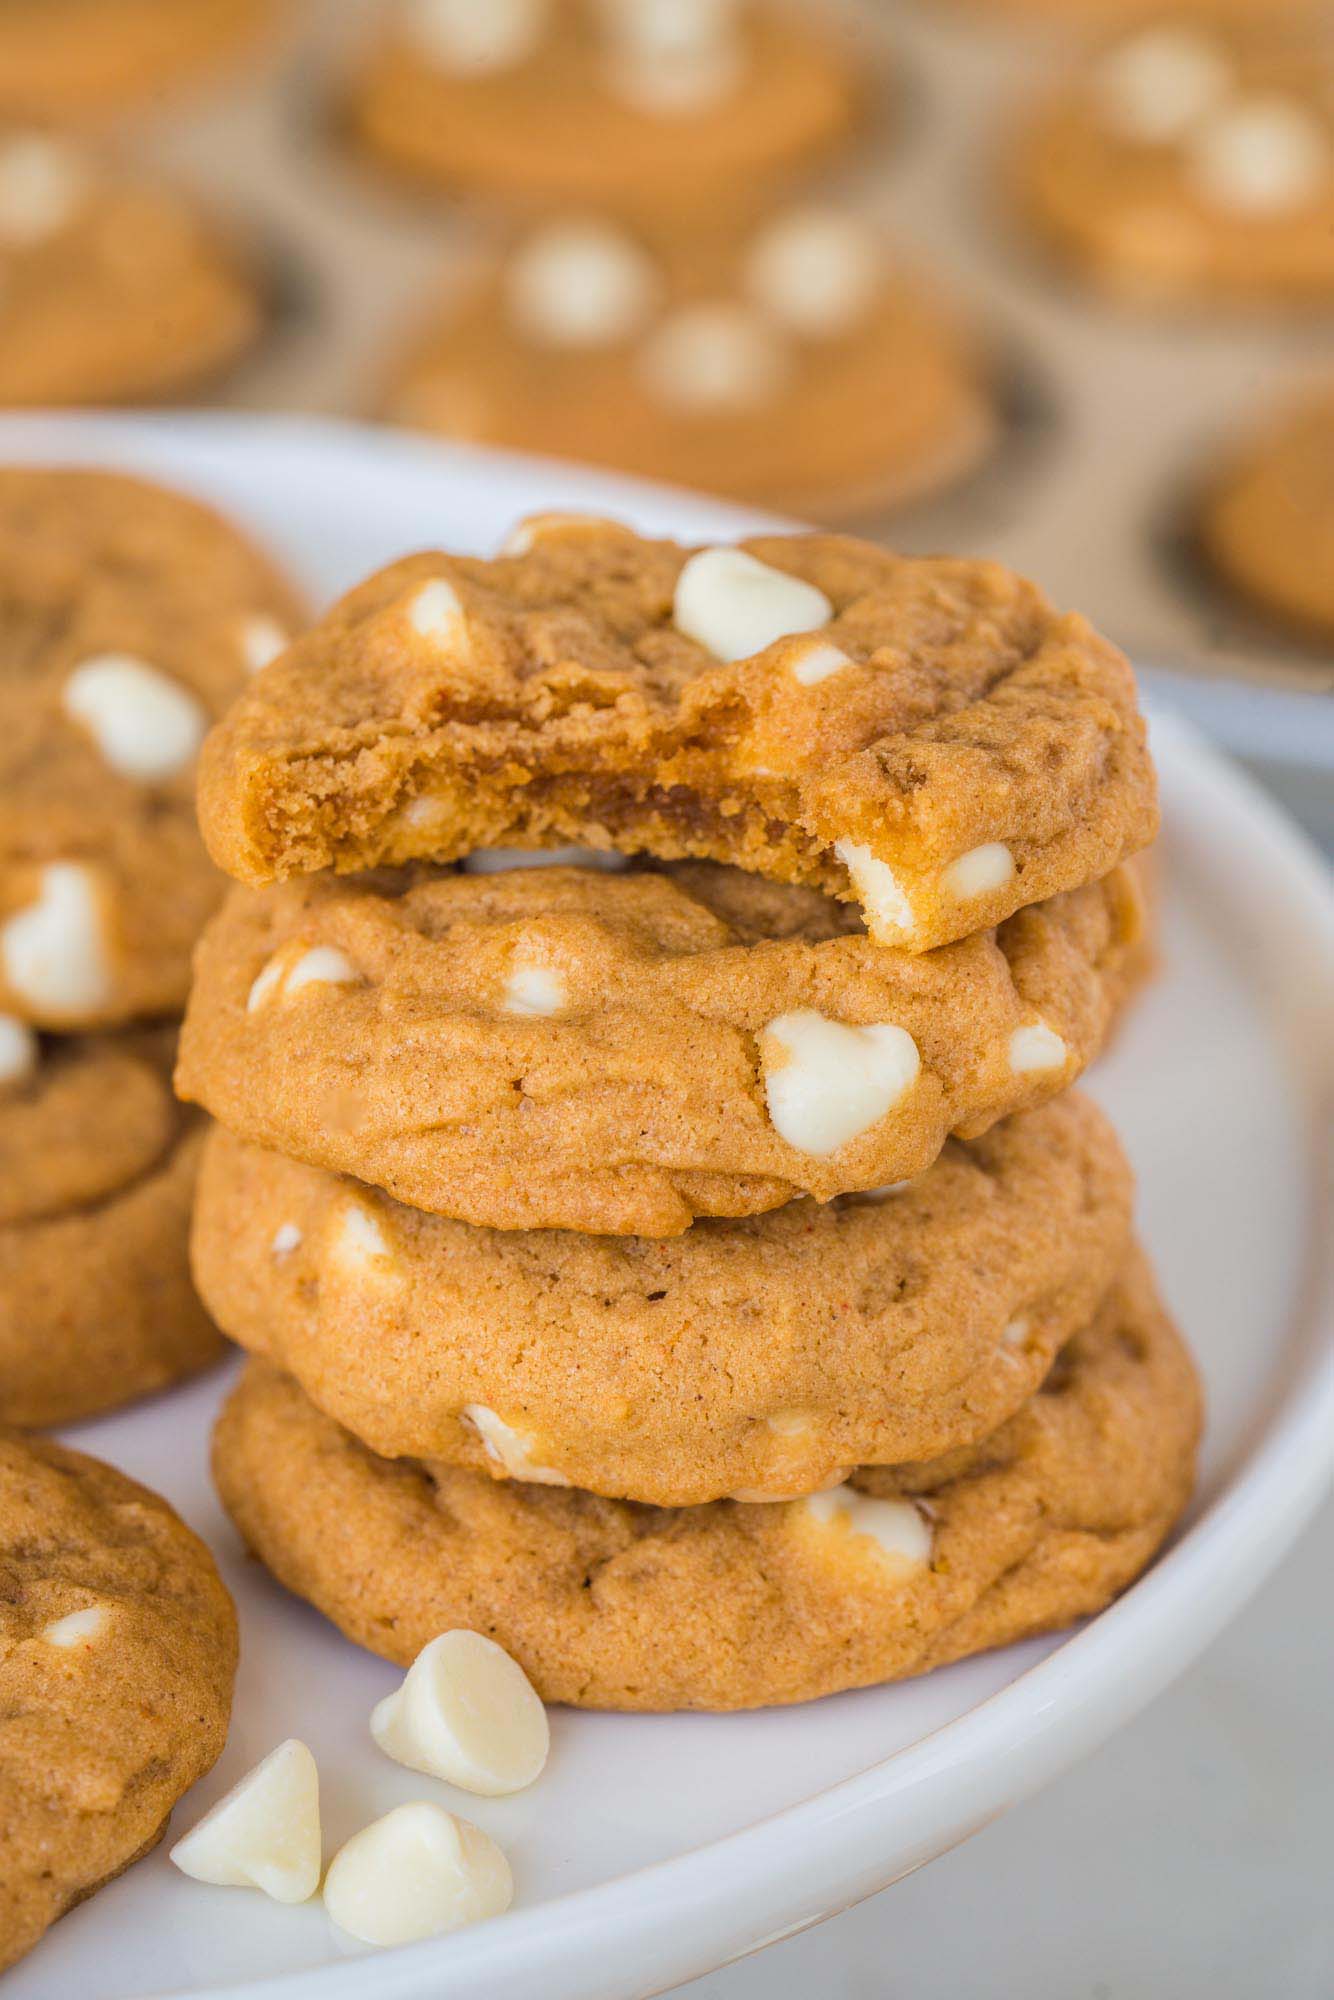 a stack of four pumpkin spice cookies on a plate, one has a bite taken out. White chocolate chips are next to the cookies